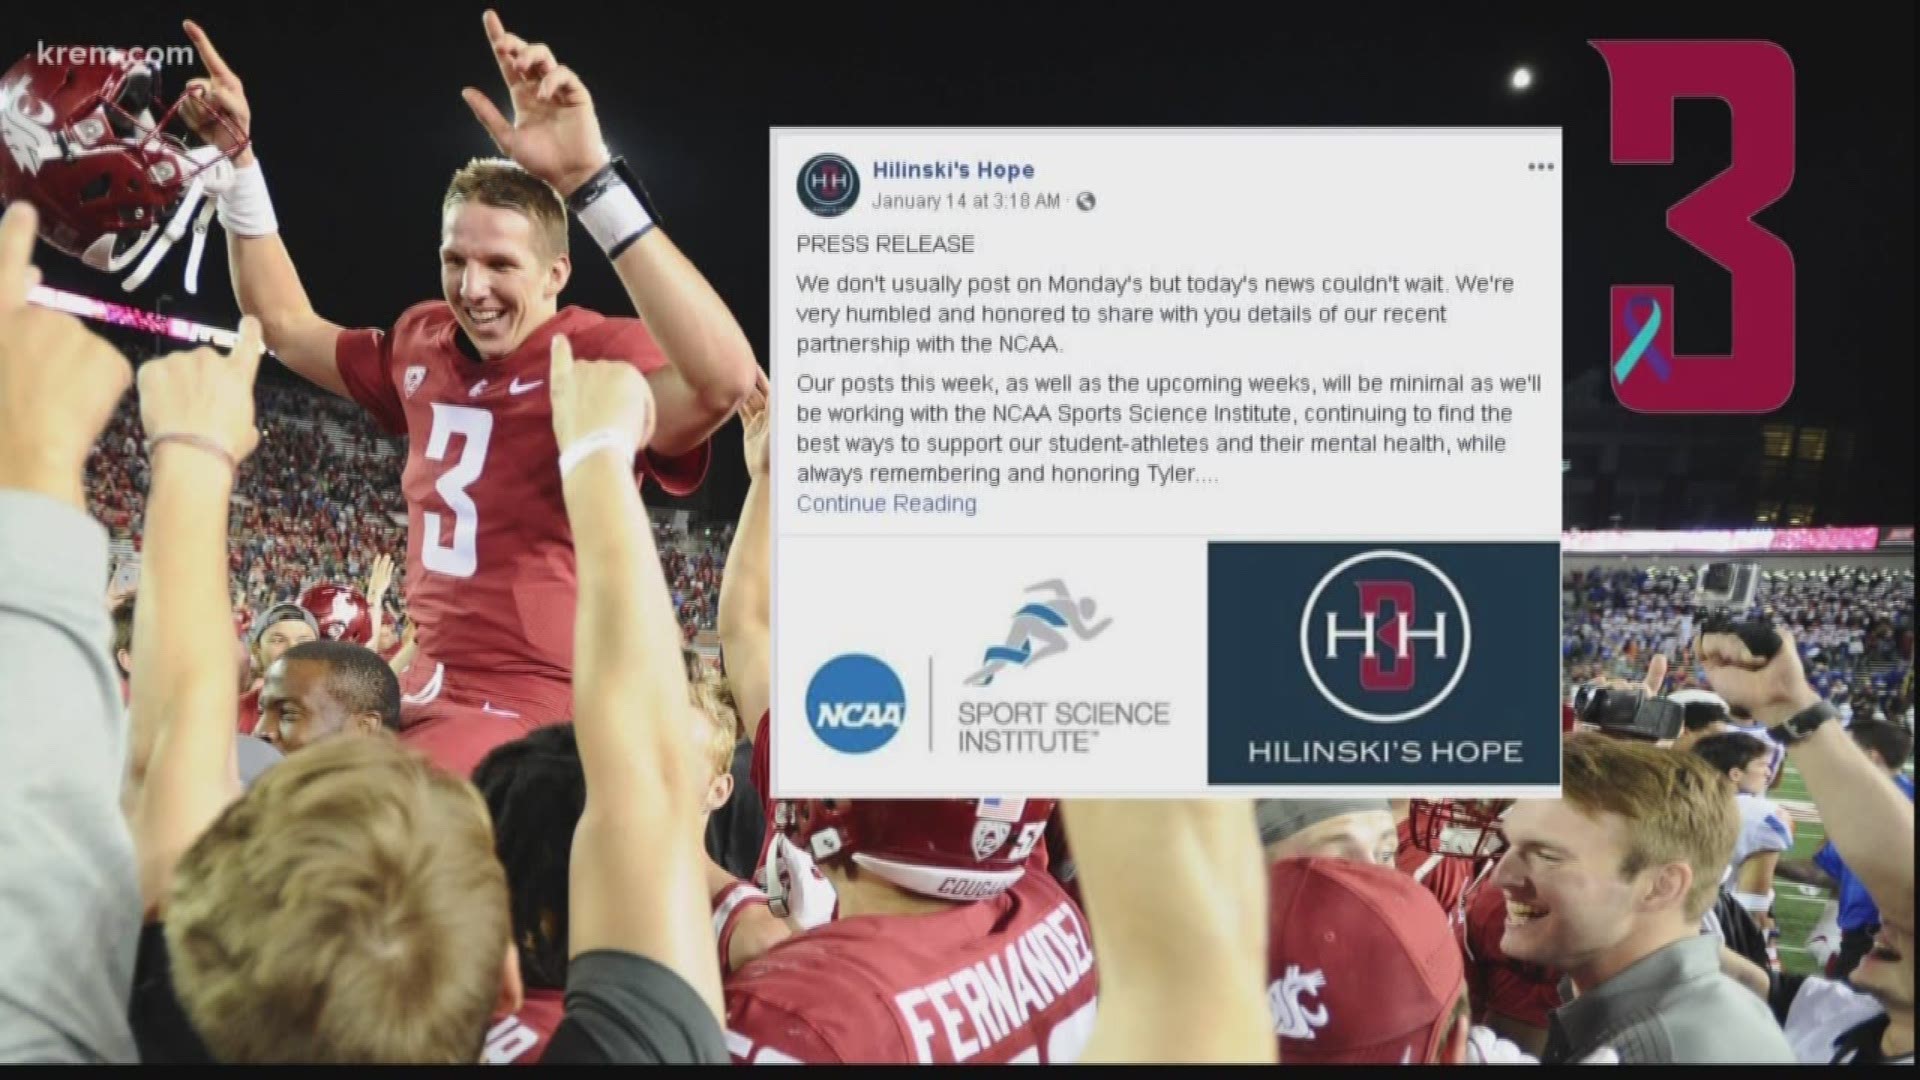 Wednesday marks one year since the Washington State University community lost beloved quarterback Tyler Hilinski to suicide.